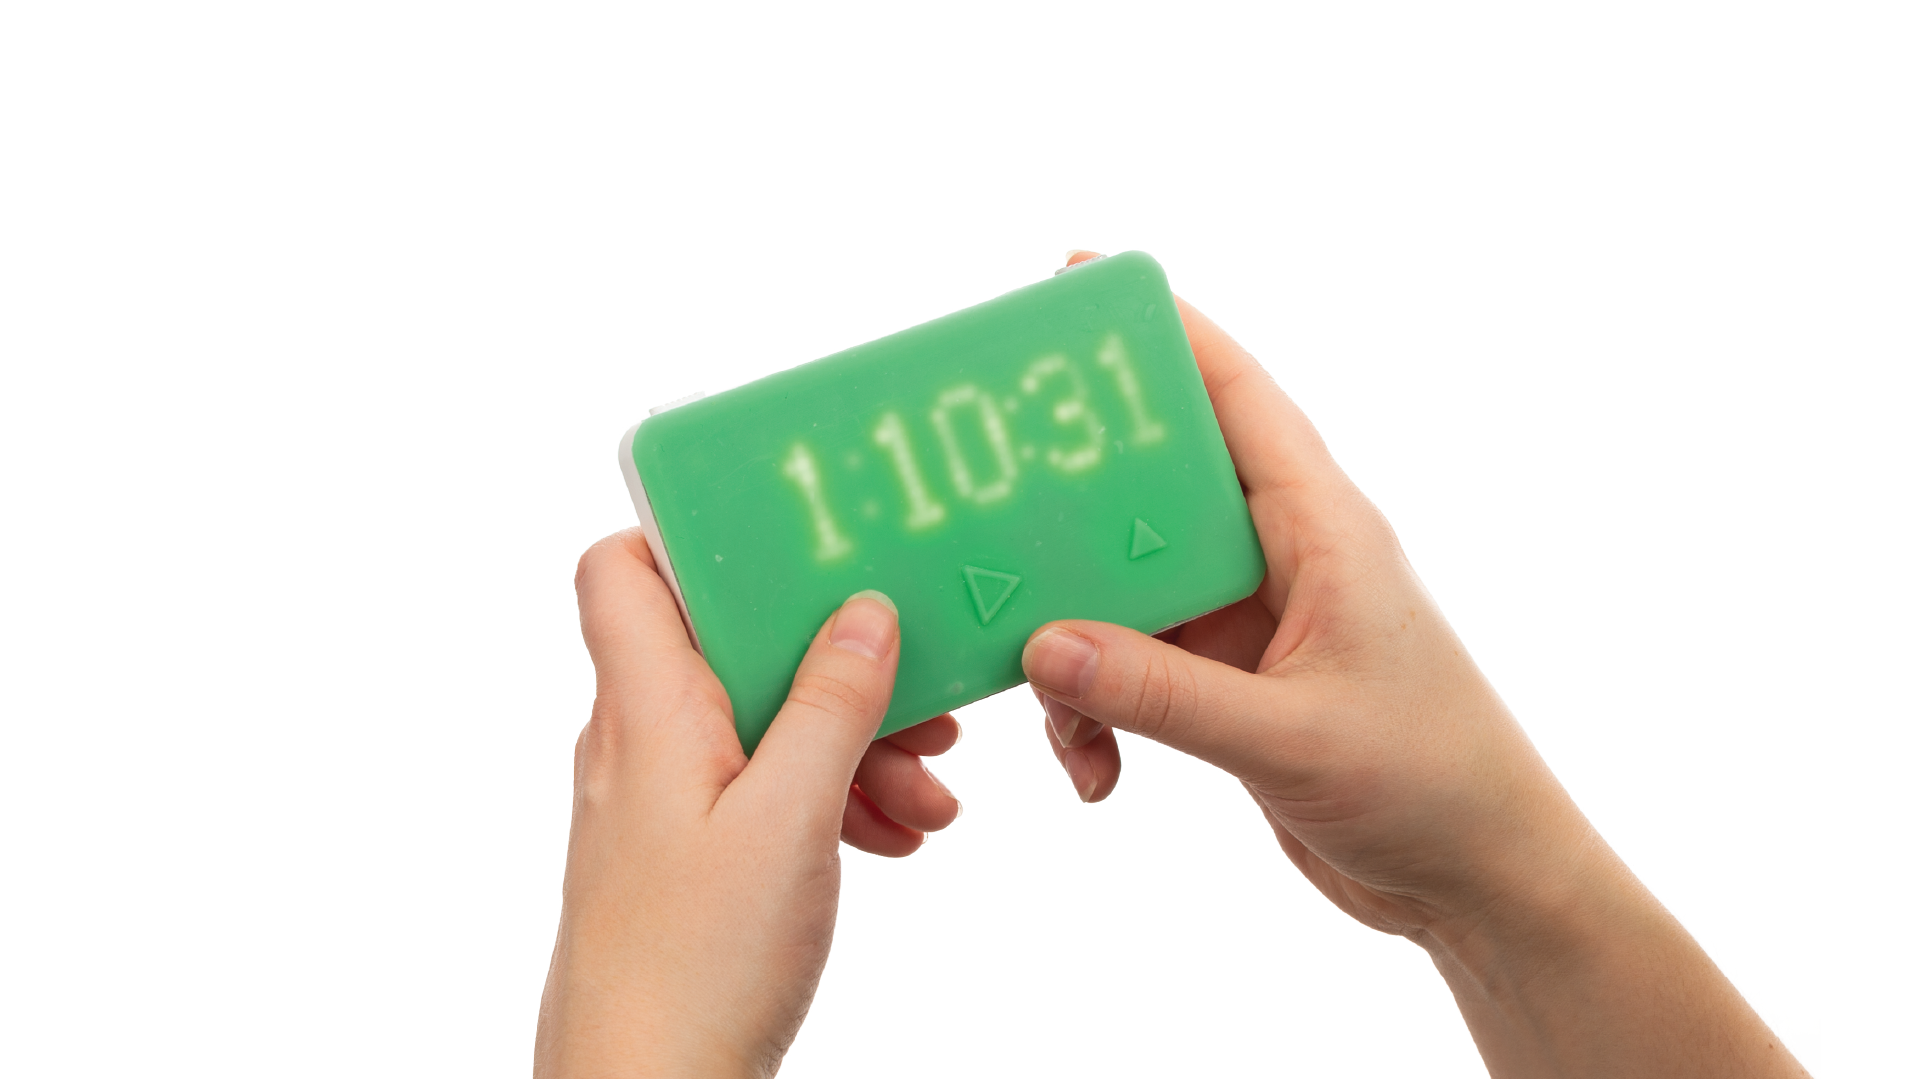 Hands holding the green timer.